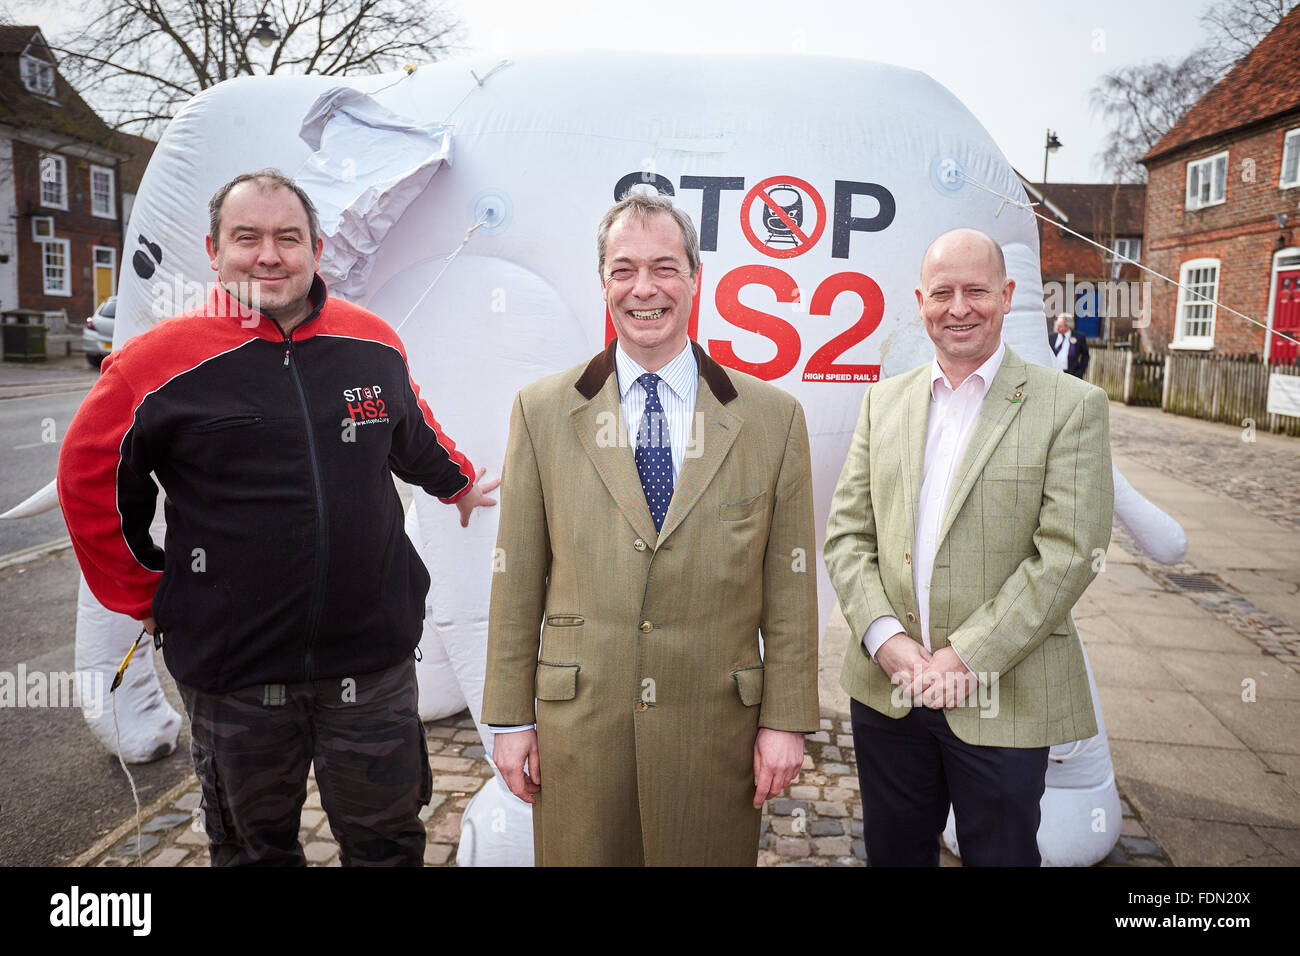 UKIP party leader Nigel Farage poses in front of the Stop HS2 inflatable white elephant with Chris Adams (R) and Joe Rukin (L) Stock Photo